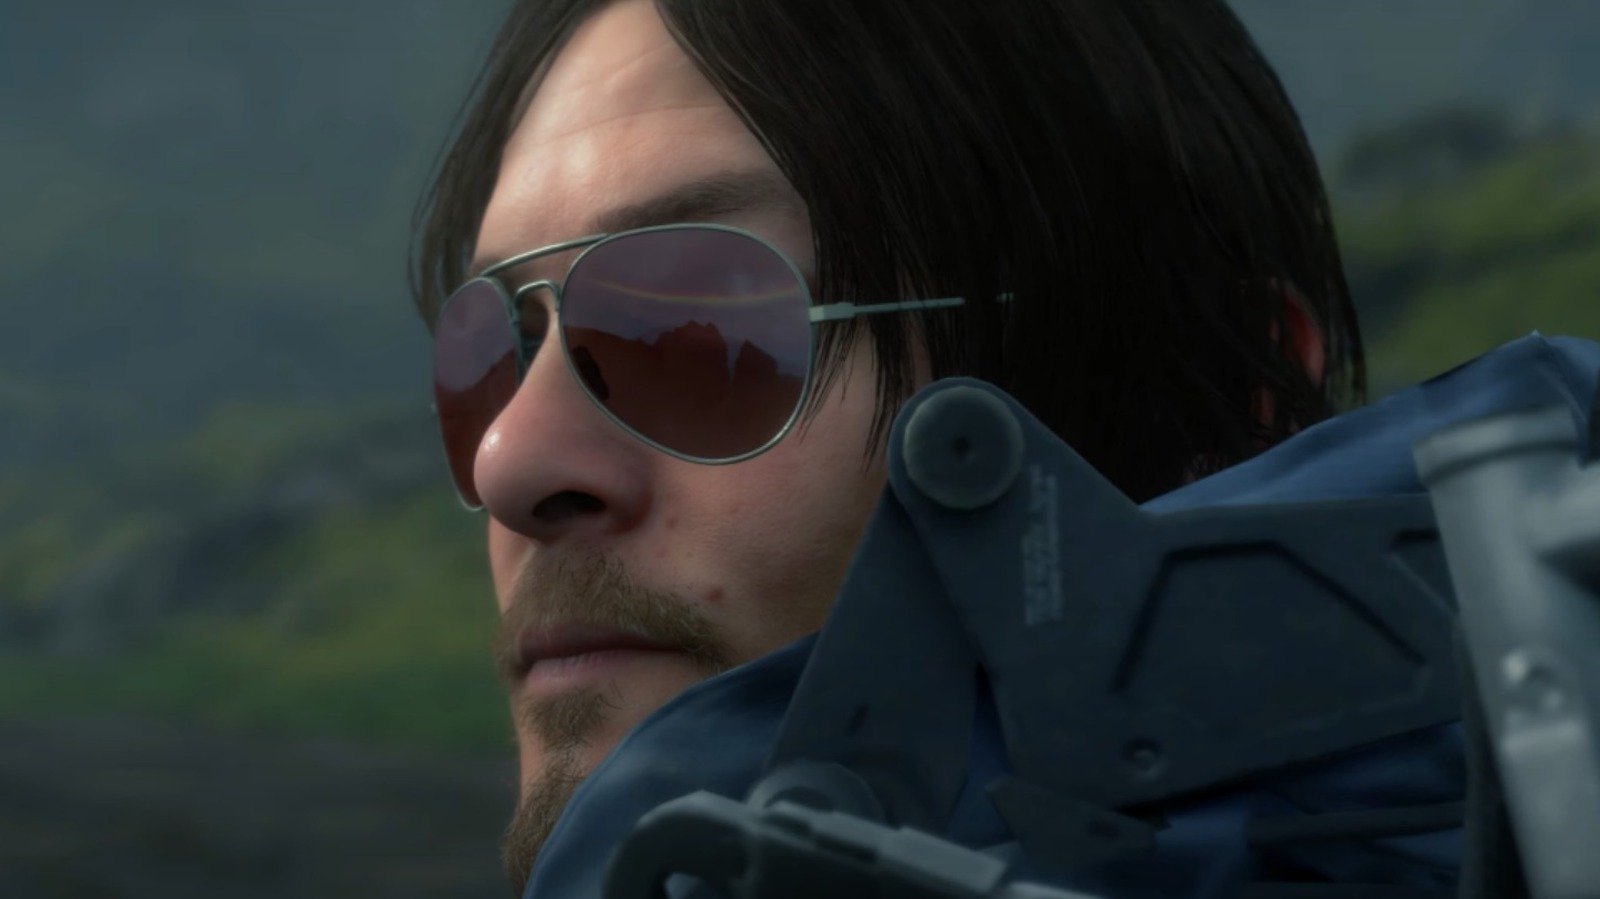 Cyberpunk 2077 Comes To Death Stranding, But There's A Catch - SVG